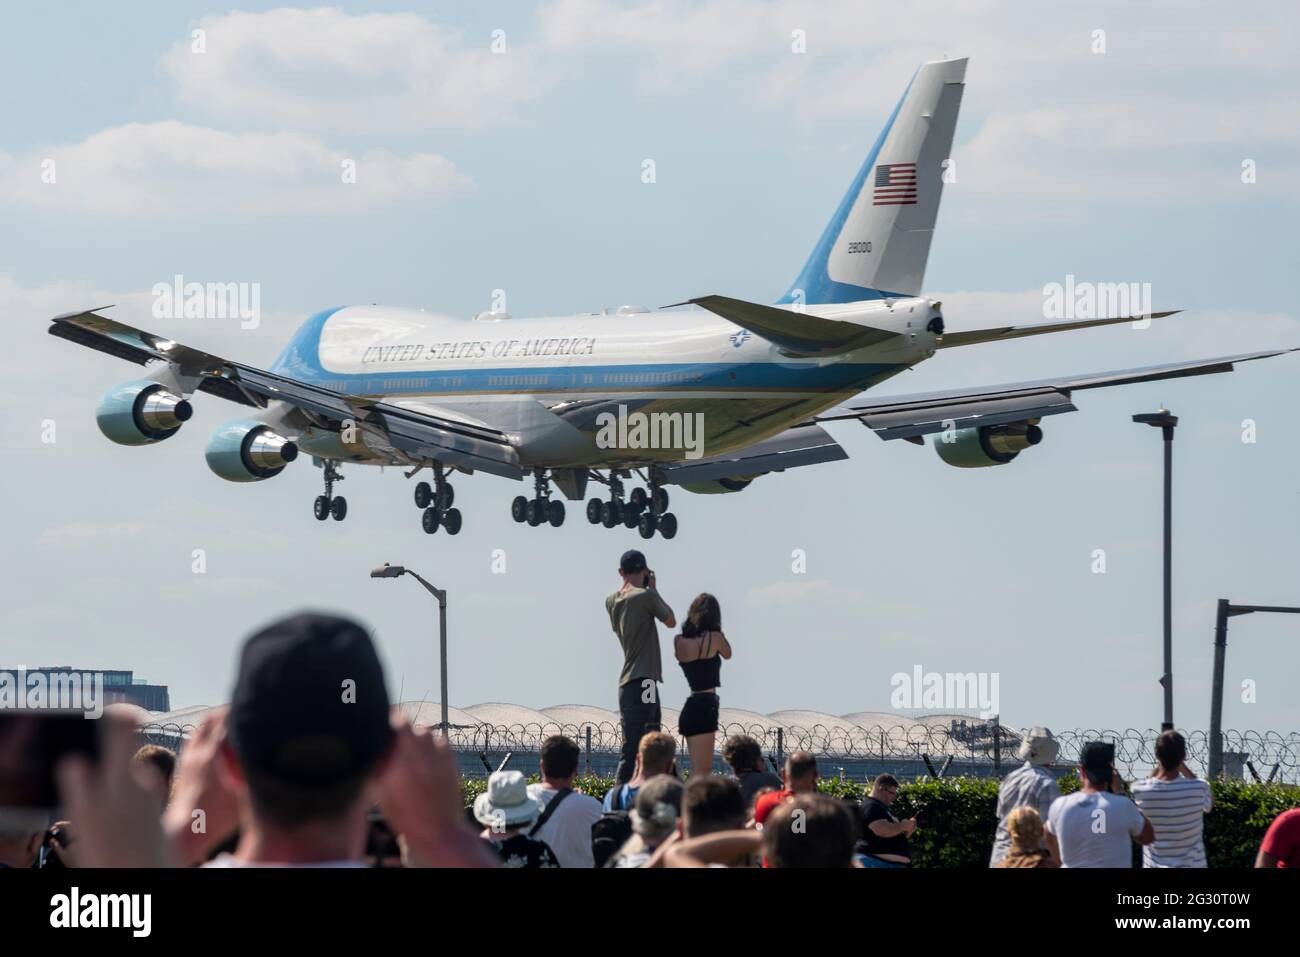 London Heathrow Airport, London, UK. 13th Jun, 2021. US Air Force Boeing  VC-25A call sign 'Air Force One' has arrived from Newquay with US president  Joe Biden on board for his visit